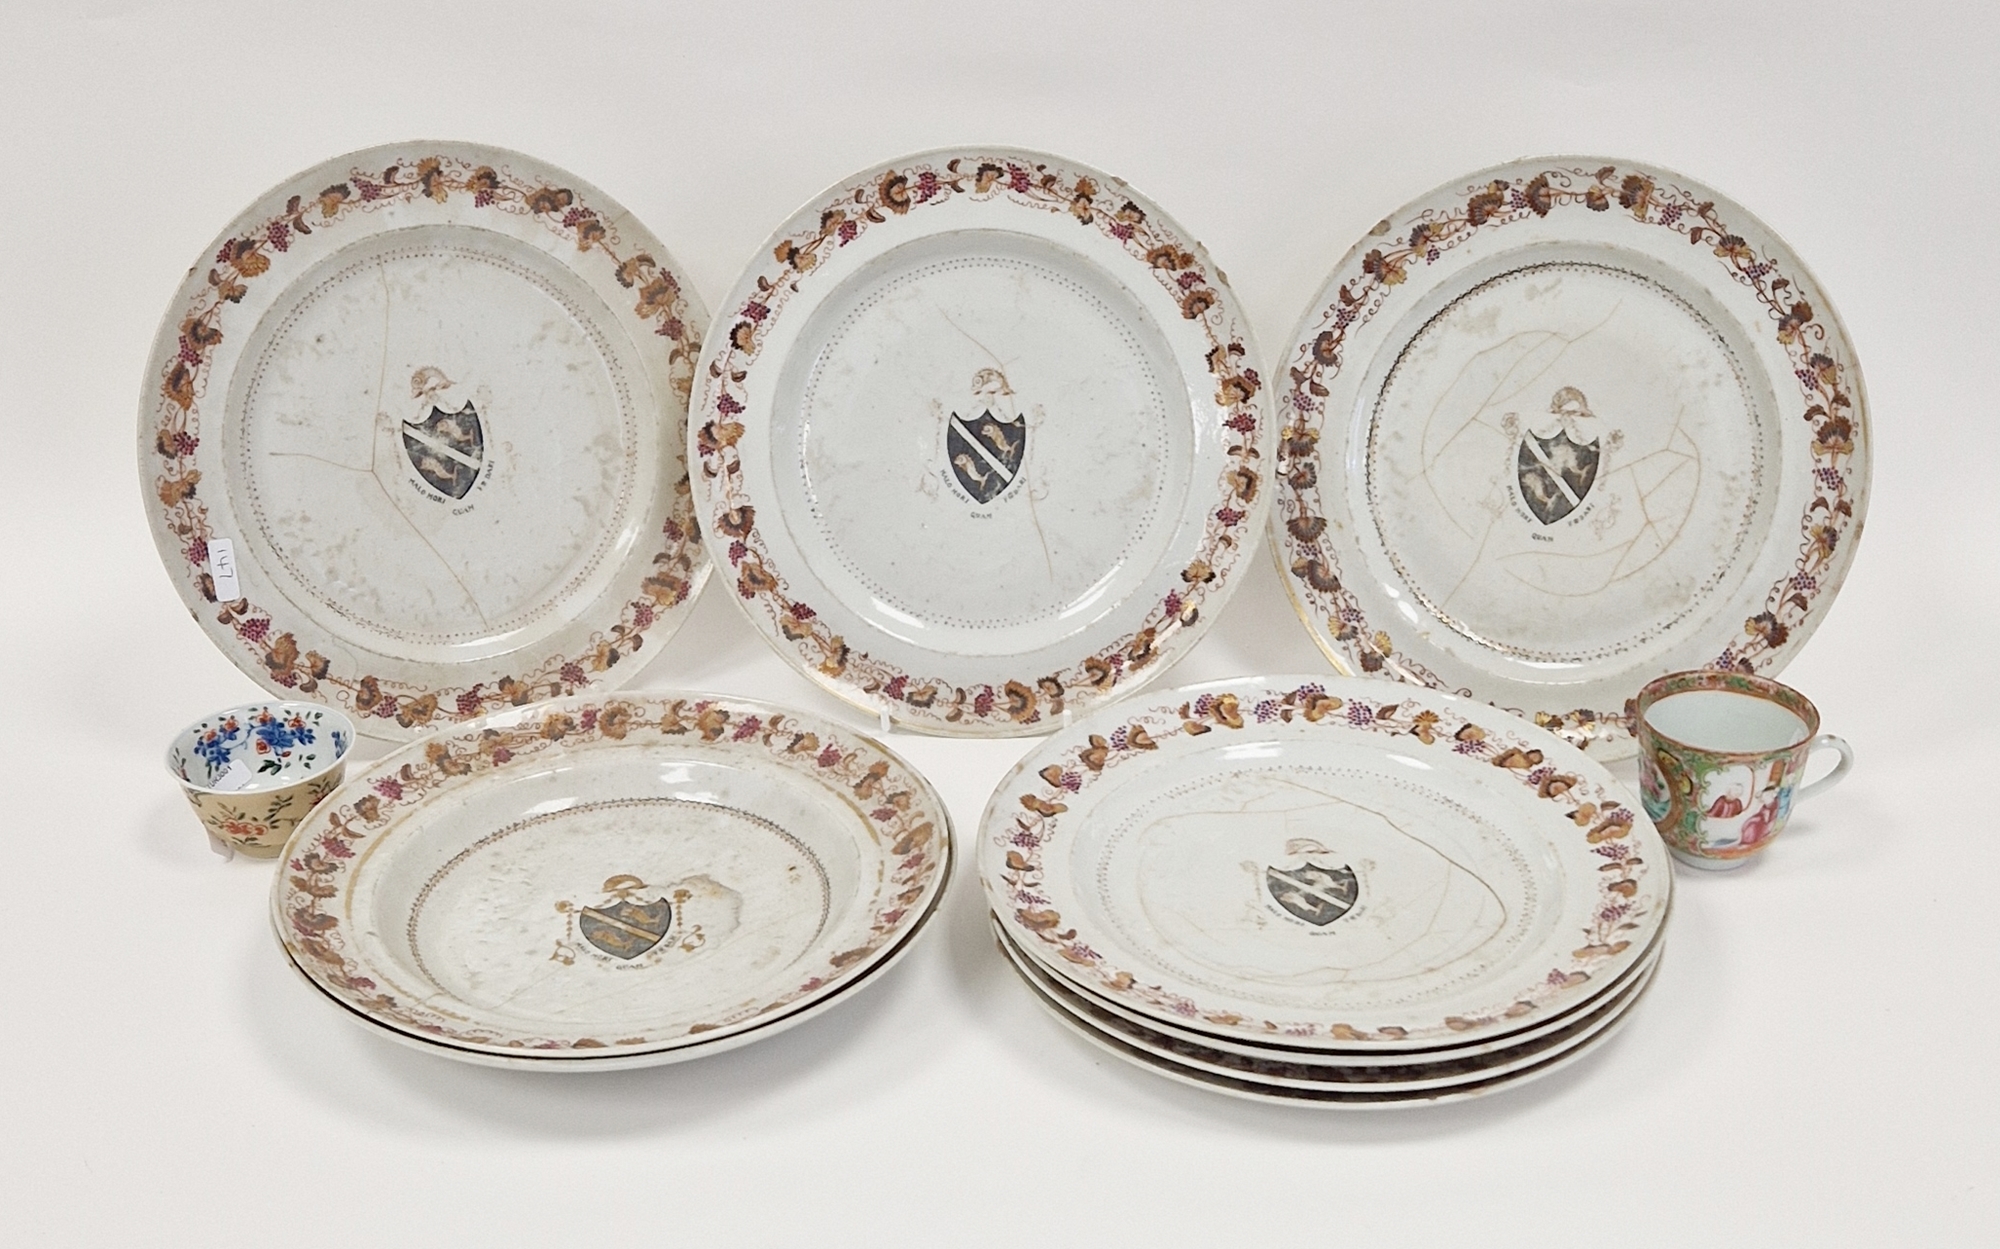 Set of 18th century Chinese export armorial dinner plates, each decorated with a black hatched